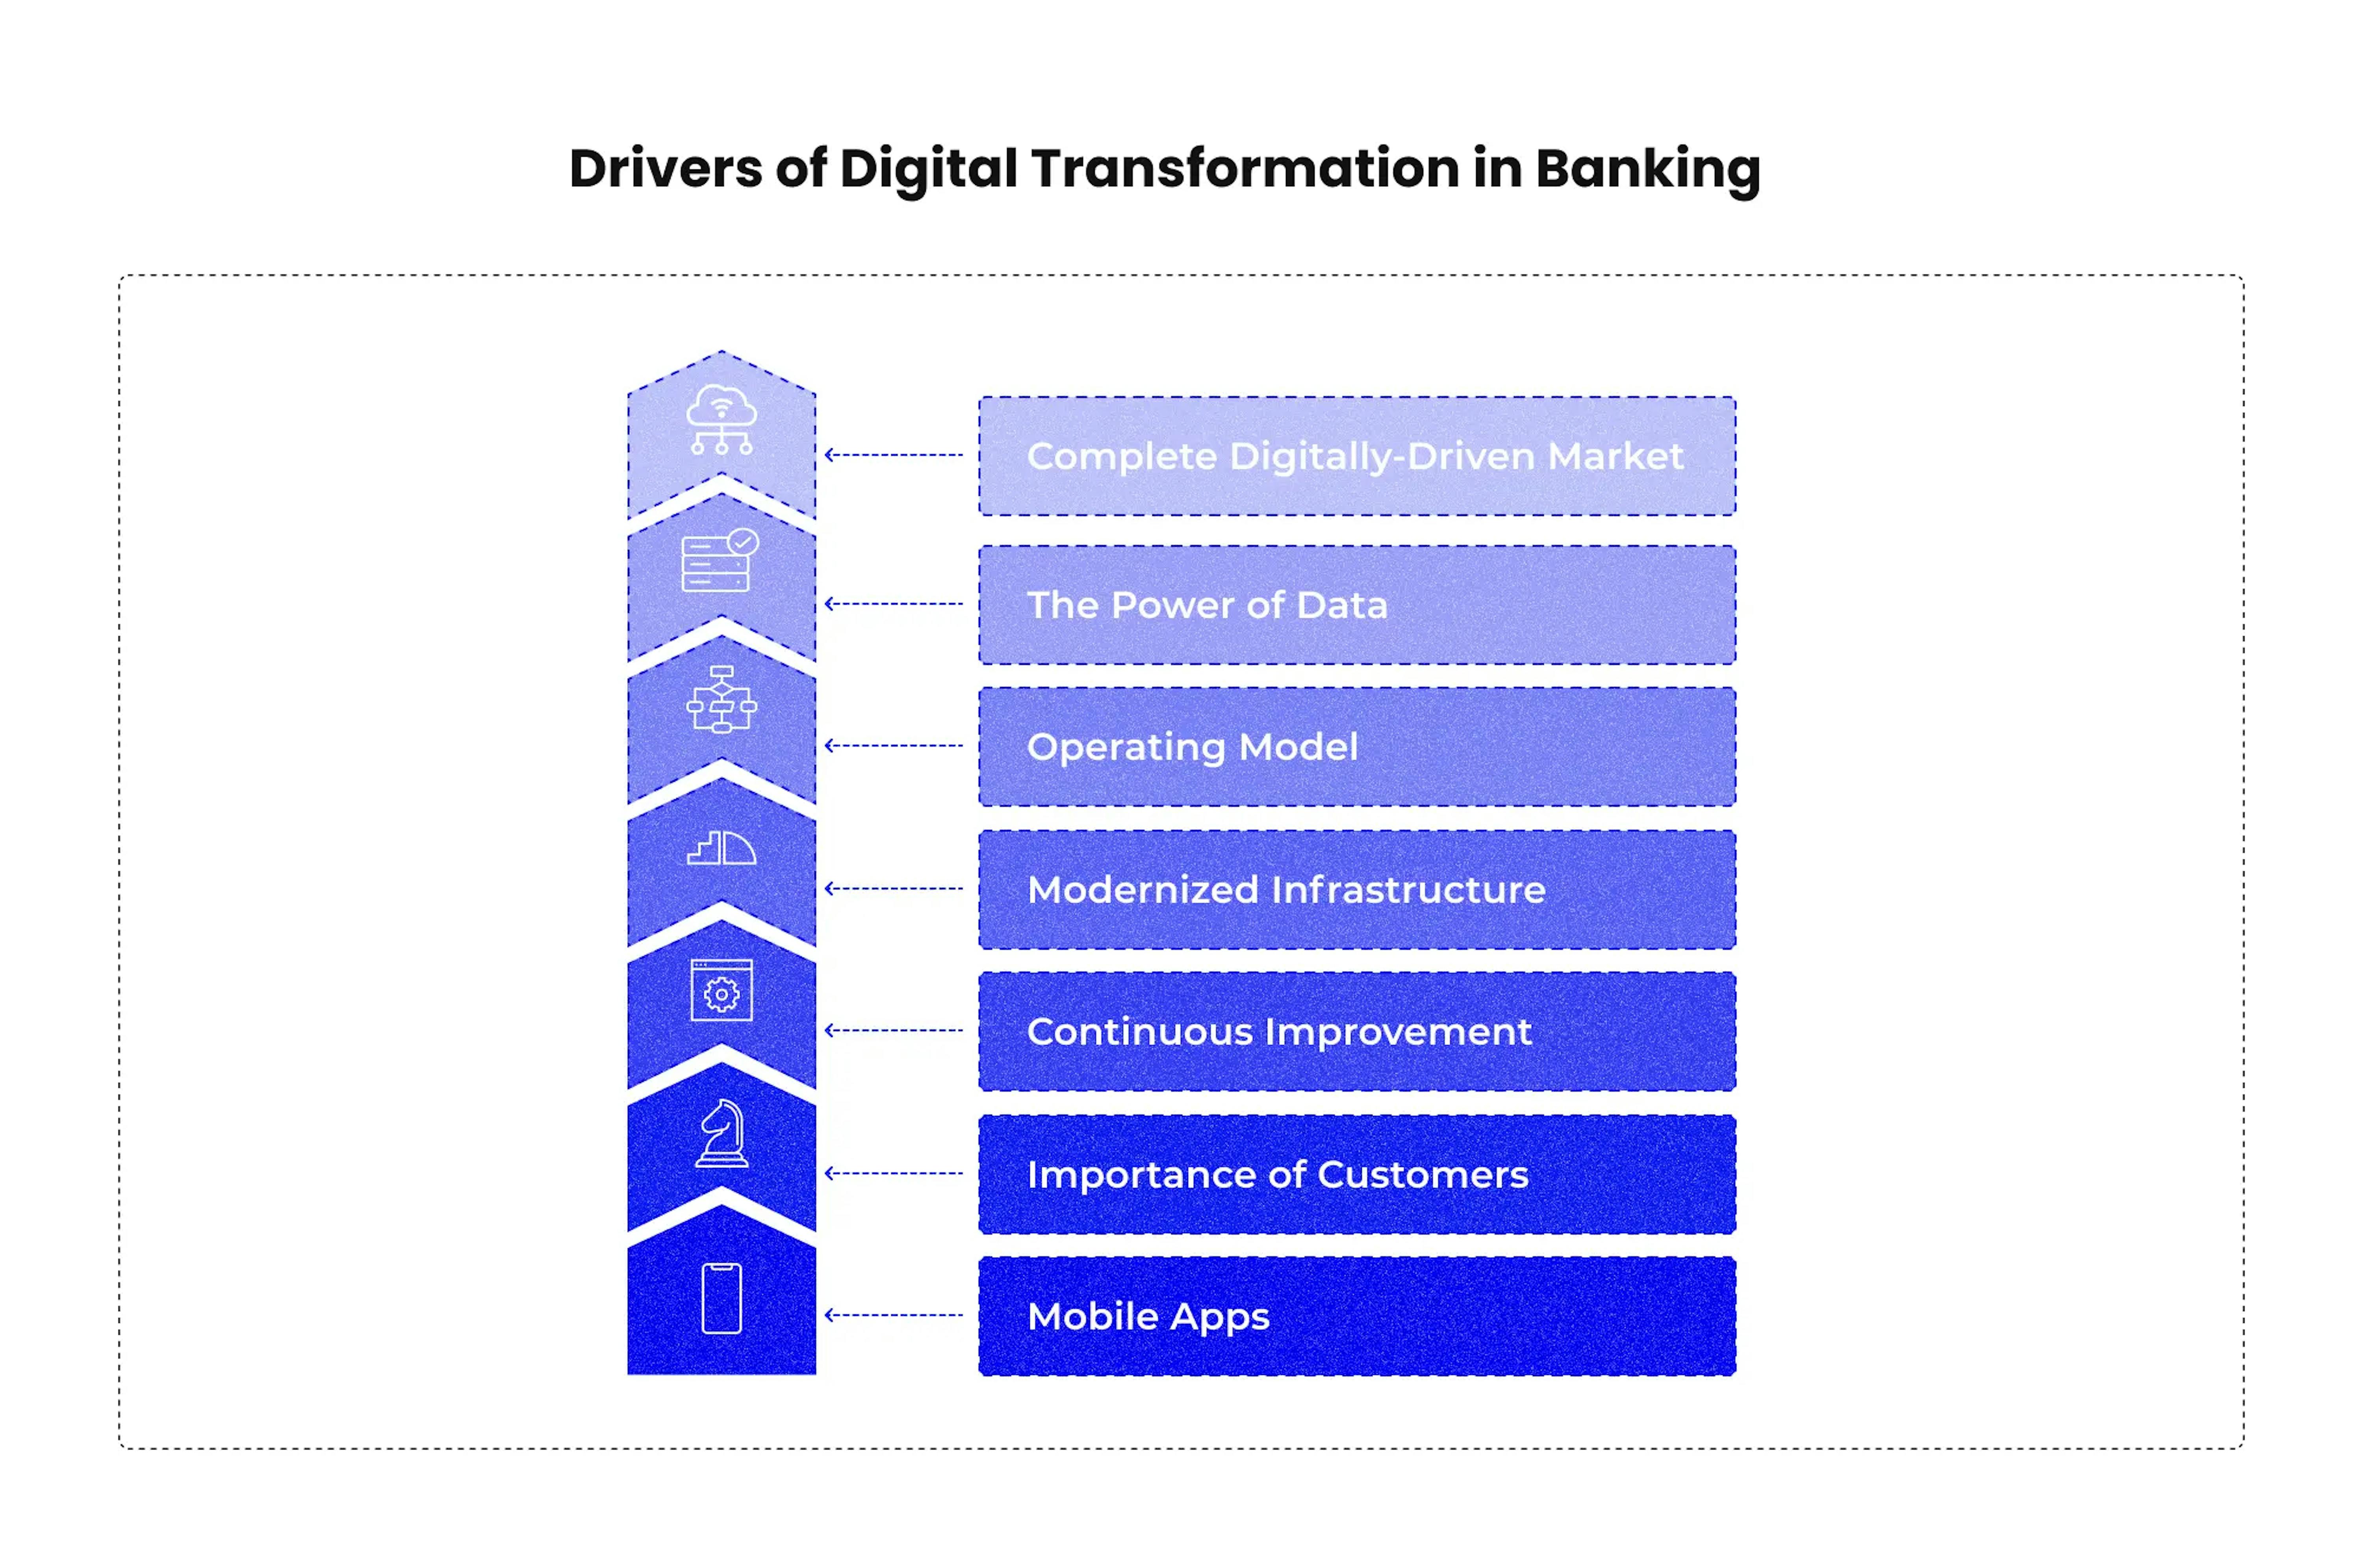 Drivers of Digital Transformation in Banking